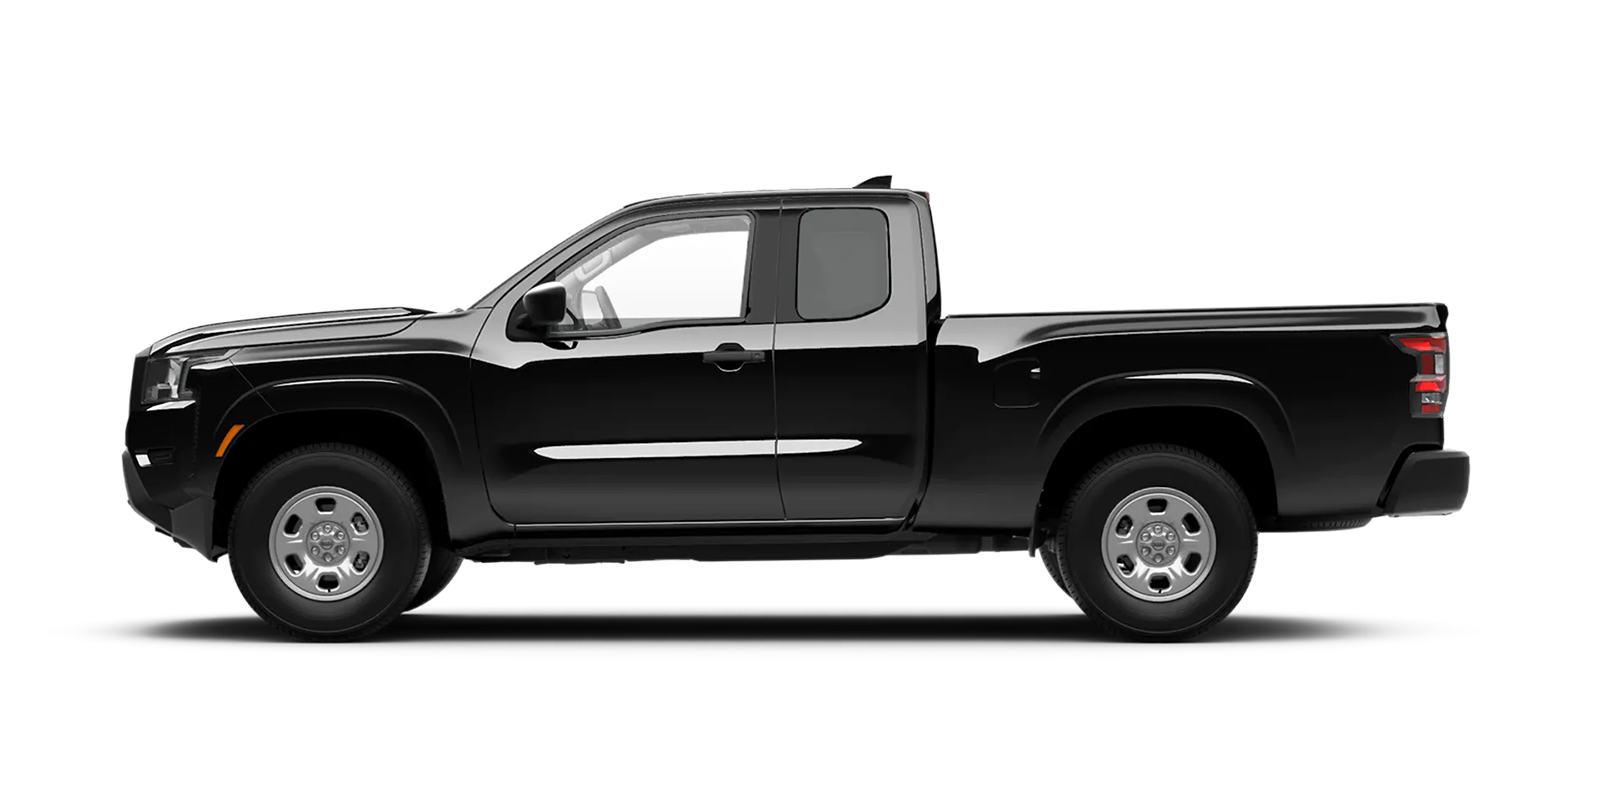 2022 Frontier King Cab S 4x4 in Super Black | Wallace Nissan of Kingsport in Kingsport TN